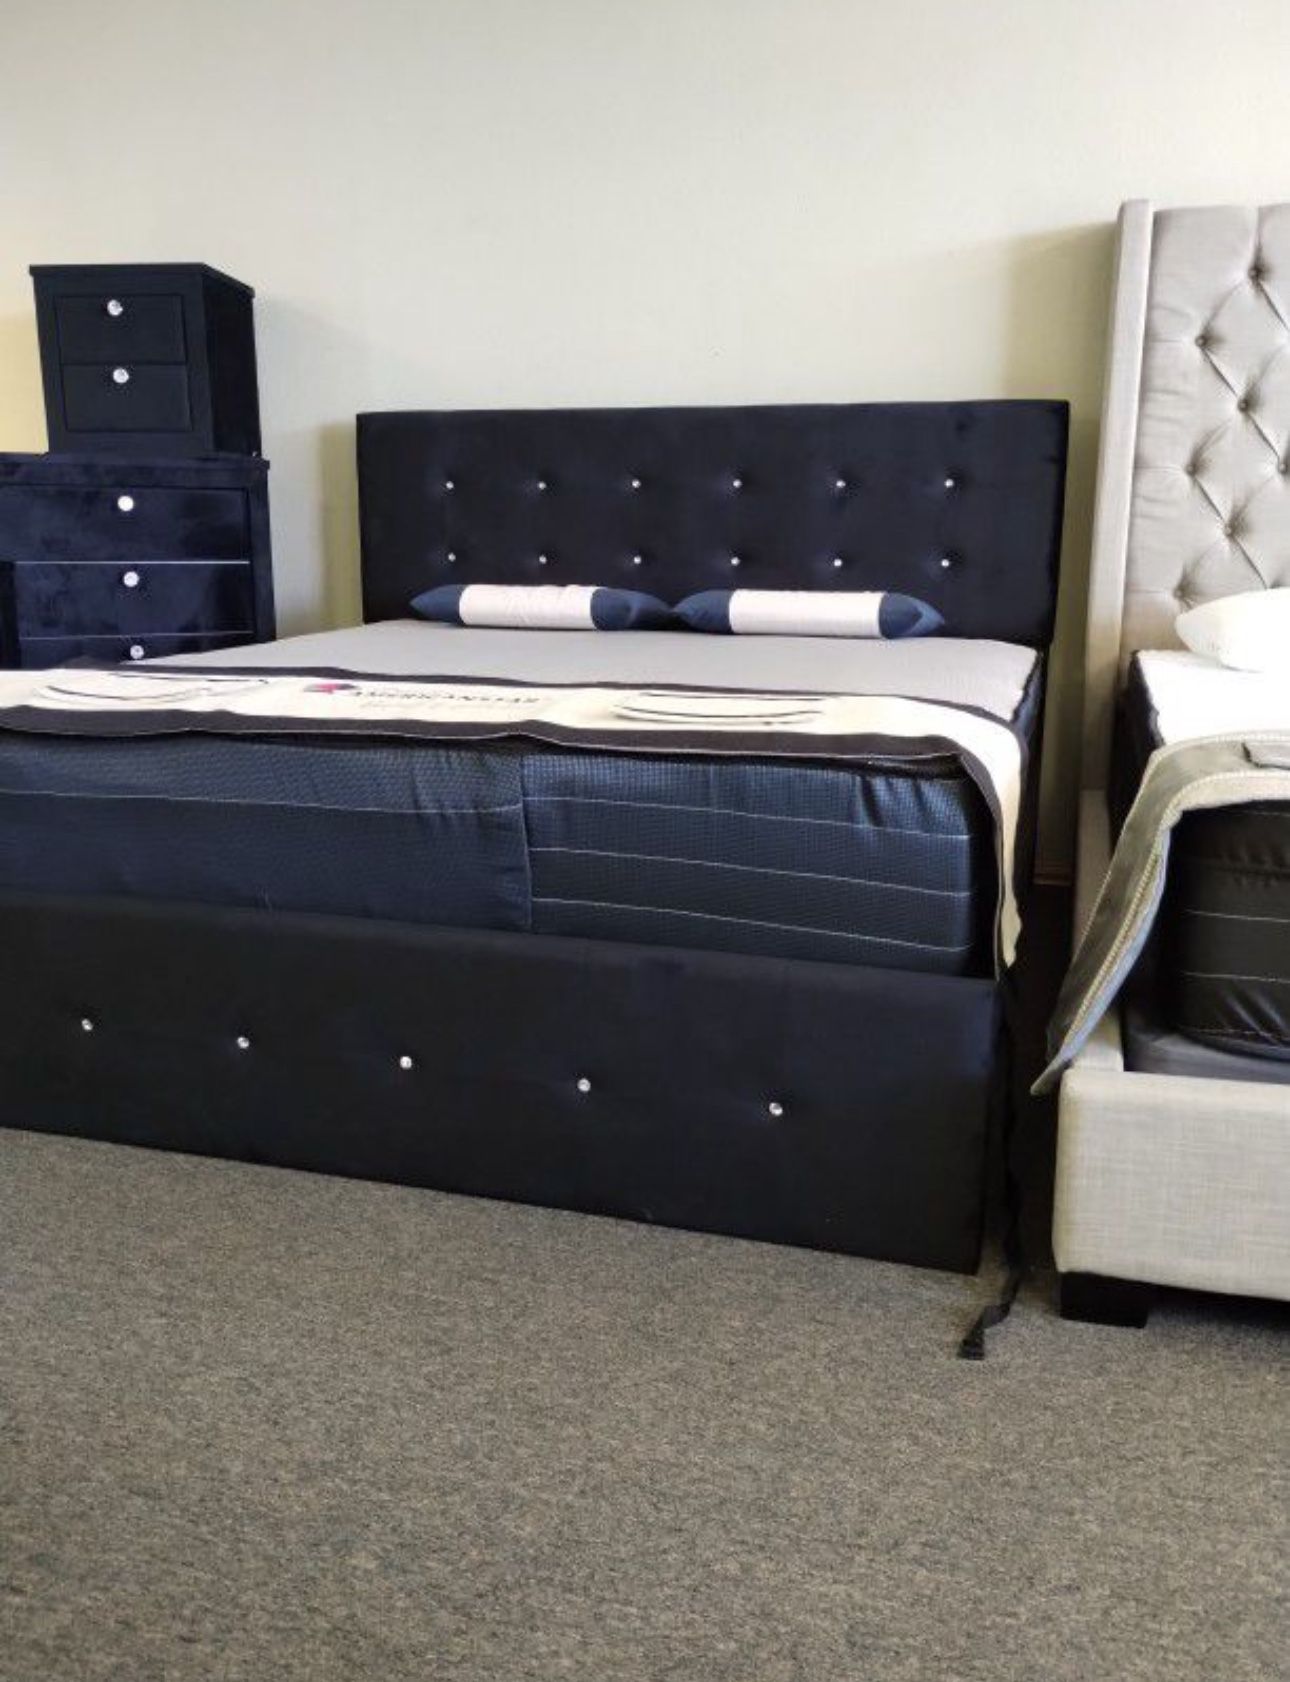 NEW KING BEDROOM SET WITHOUT MATTRESS AND FREE DELIVERY 